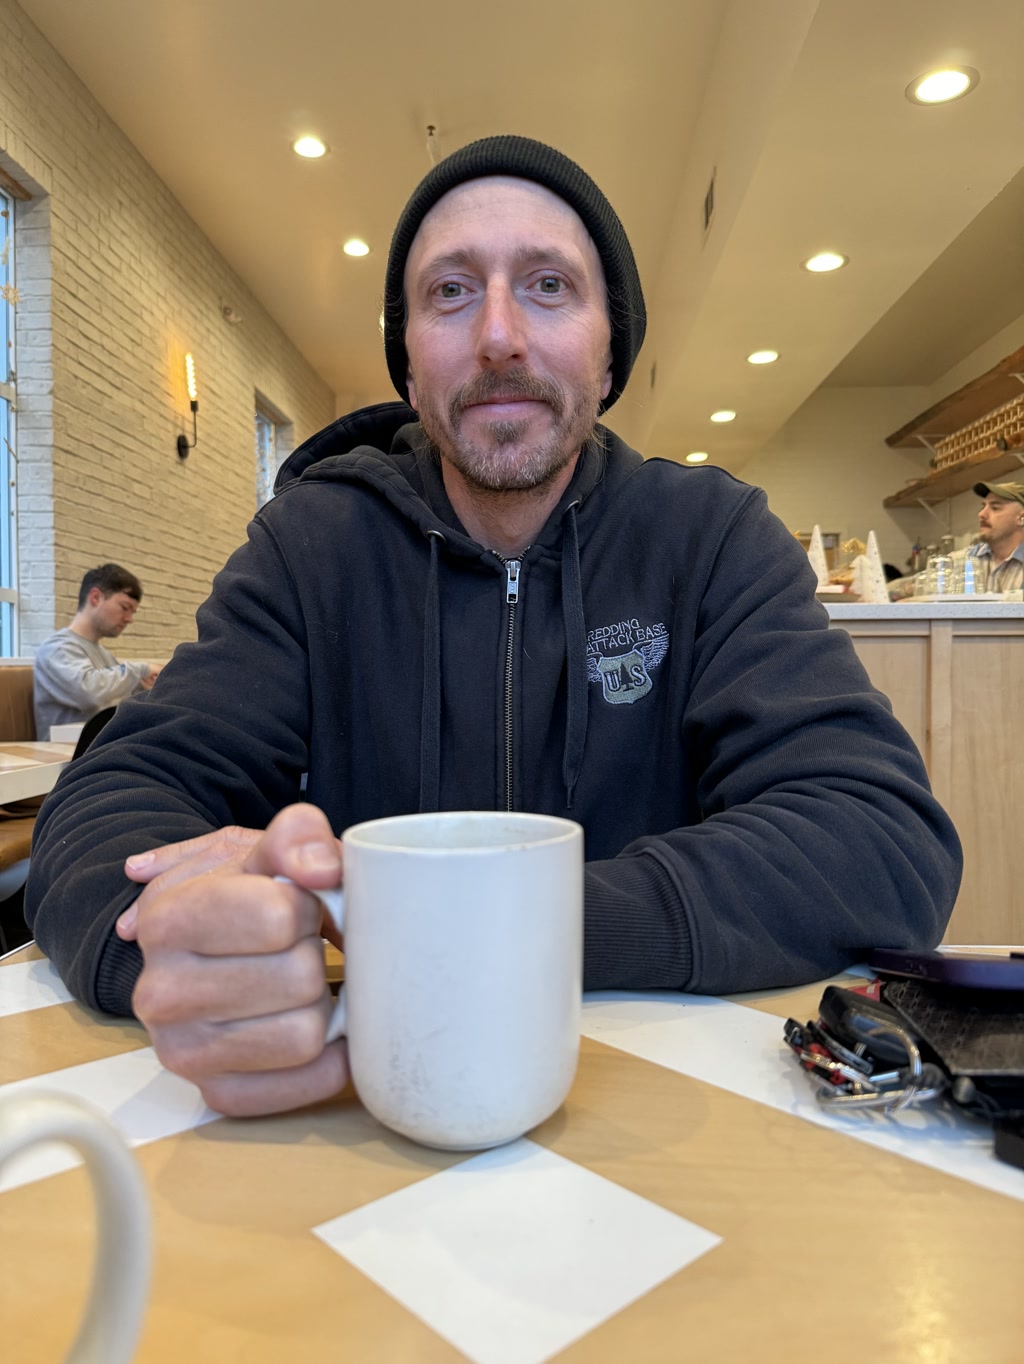 A person is sitting at a table, holding a white mug. They have a close-cut beard and mustache and are wearing a black beanie and a black hoodie with a zipper and white lettering. The hoodie has an emblem on the left side with some text and an illustration of a jumping fish that reads 'REDDING UPDATE ATTACK TEAM'. On the table there are also some keys and a smartphone with a purple case. The background suggests the setting is a cafe, with bright interior lighting, additional seating, and what appears to be a service counter.